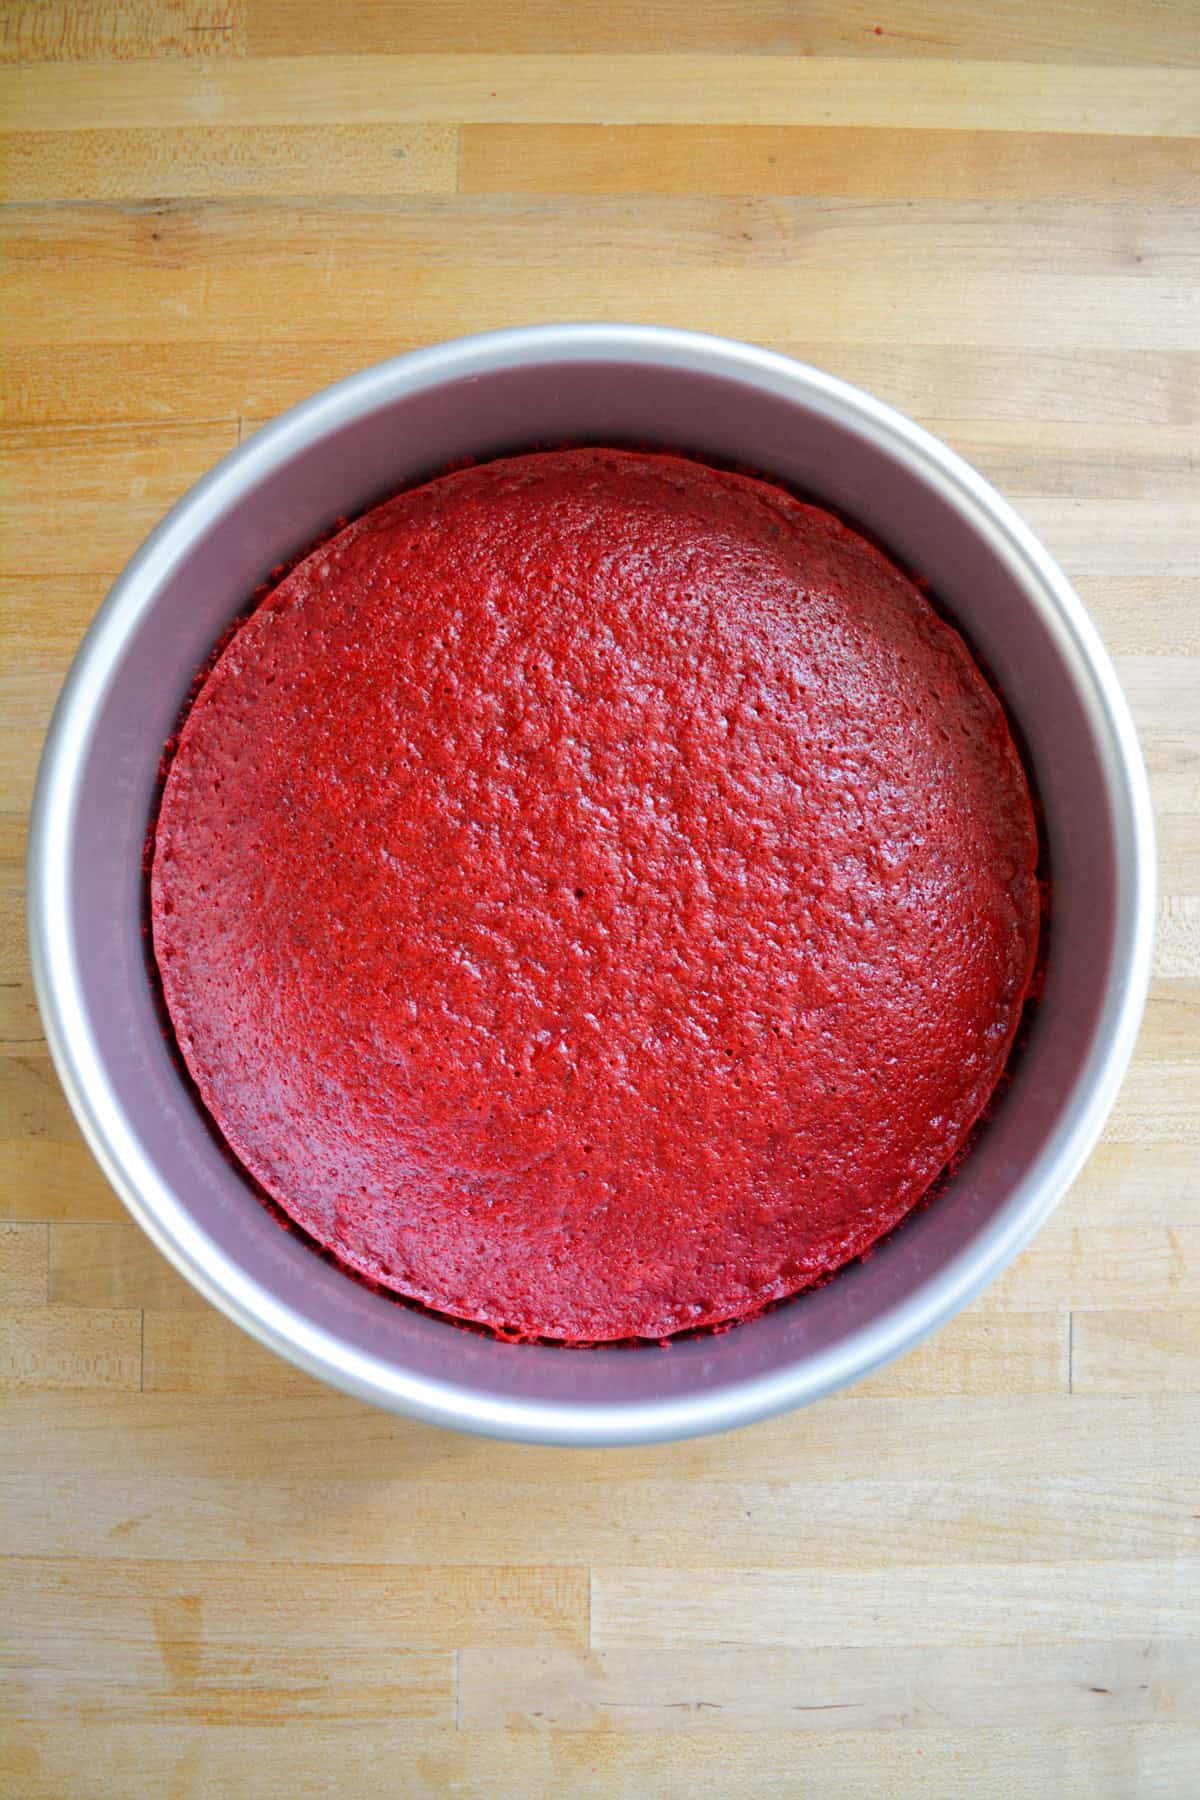 Baked cake layer in a round cake pan.